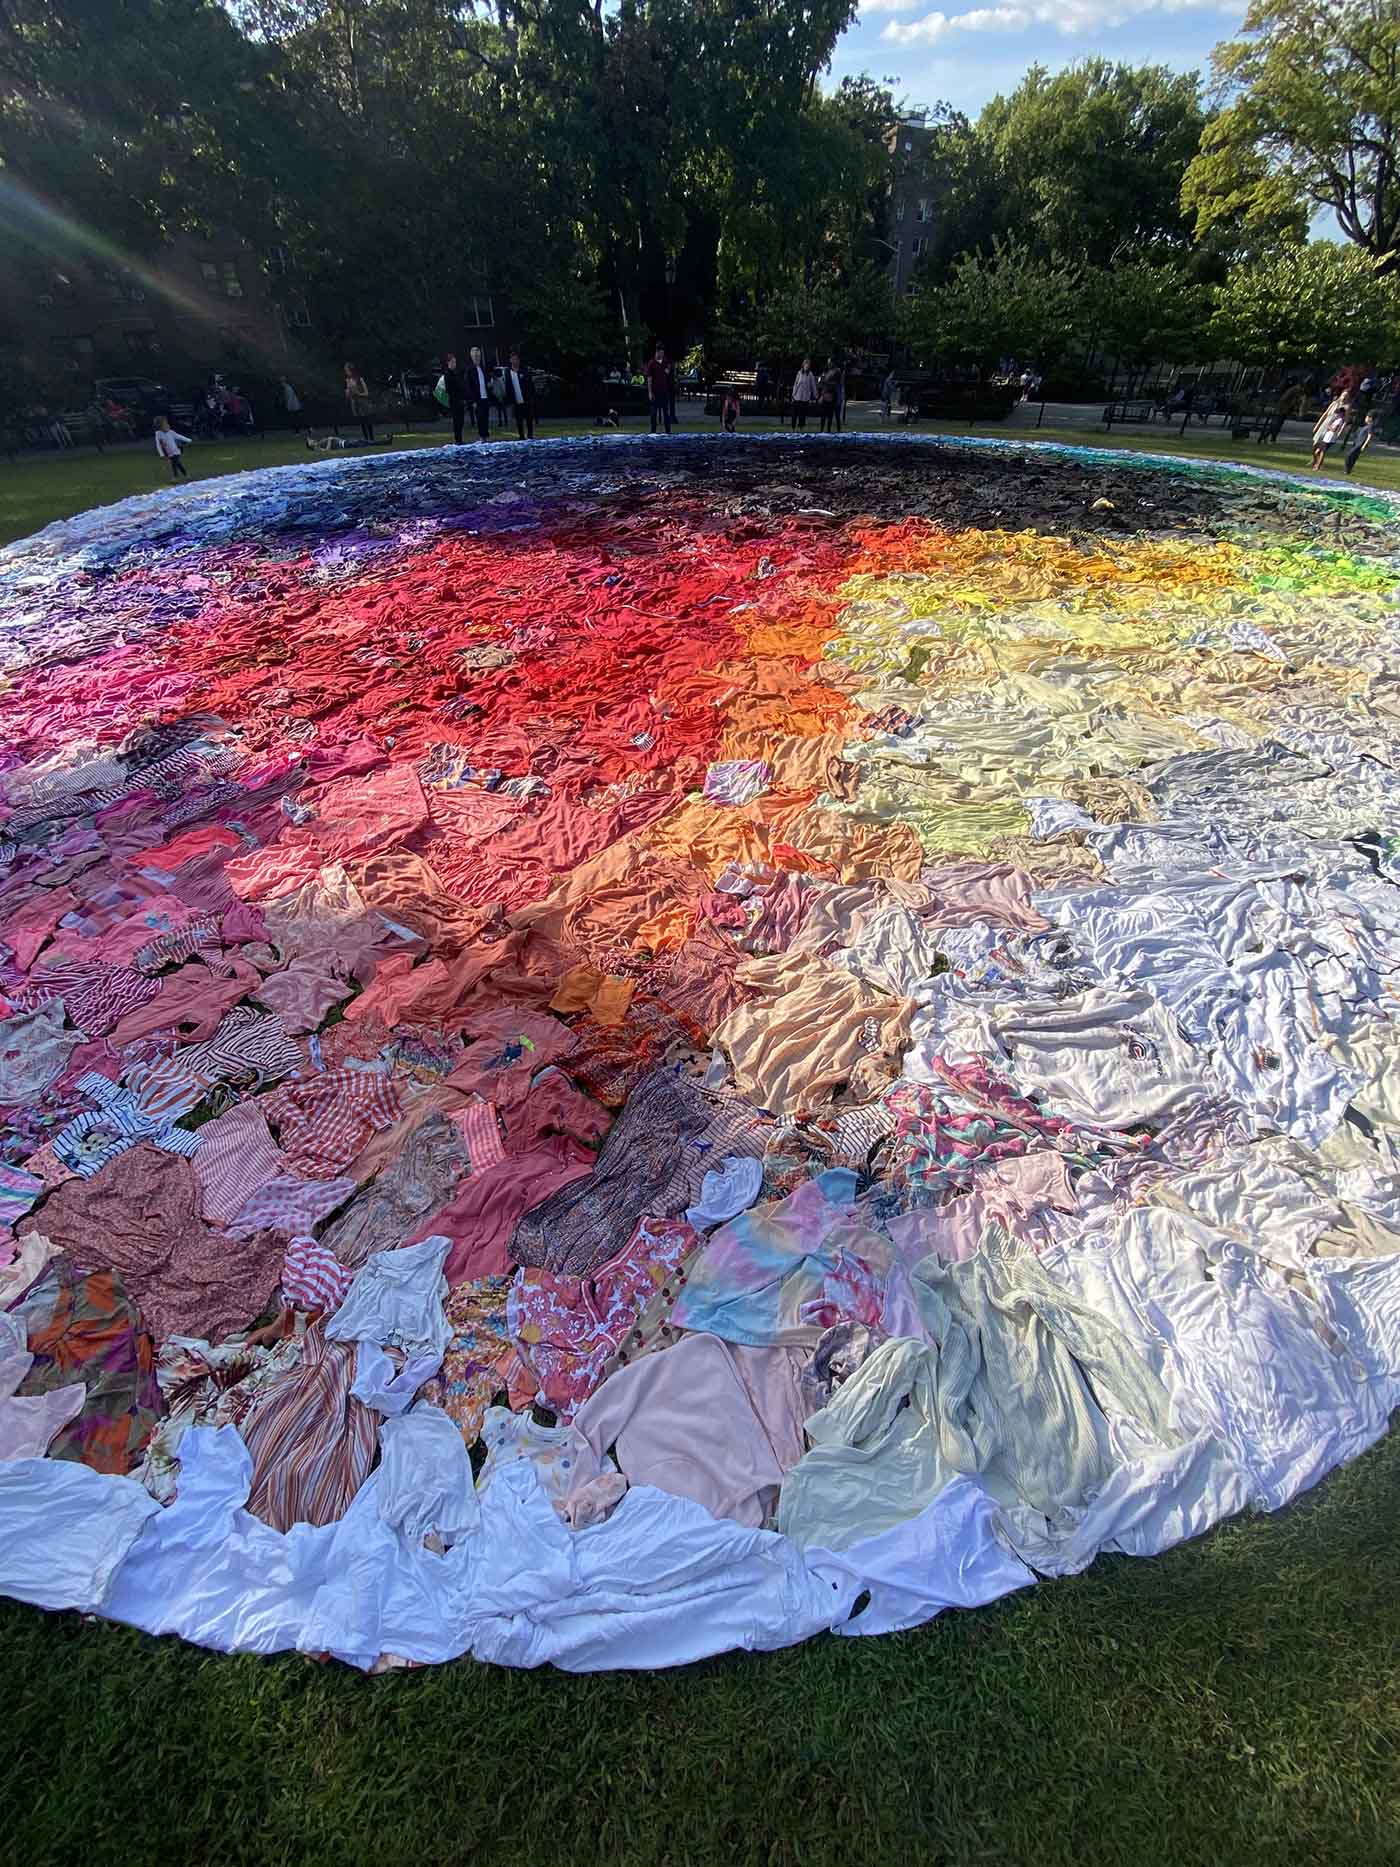 Clothing Sculpture: To Reshuffle the Sun – The hill-shaped lawn in Travers Park covered with second-hand clothing, arranged like a giant color wheel but with a dark center and a light outer edge. 100 feet wide.